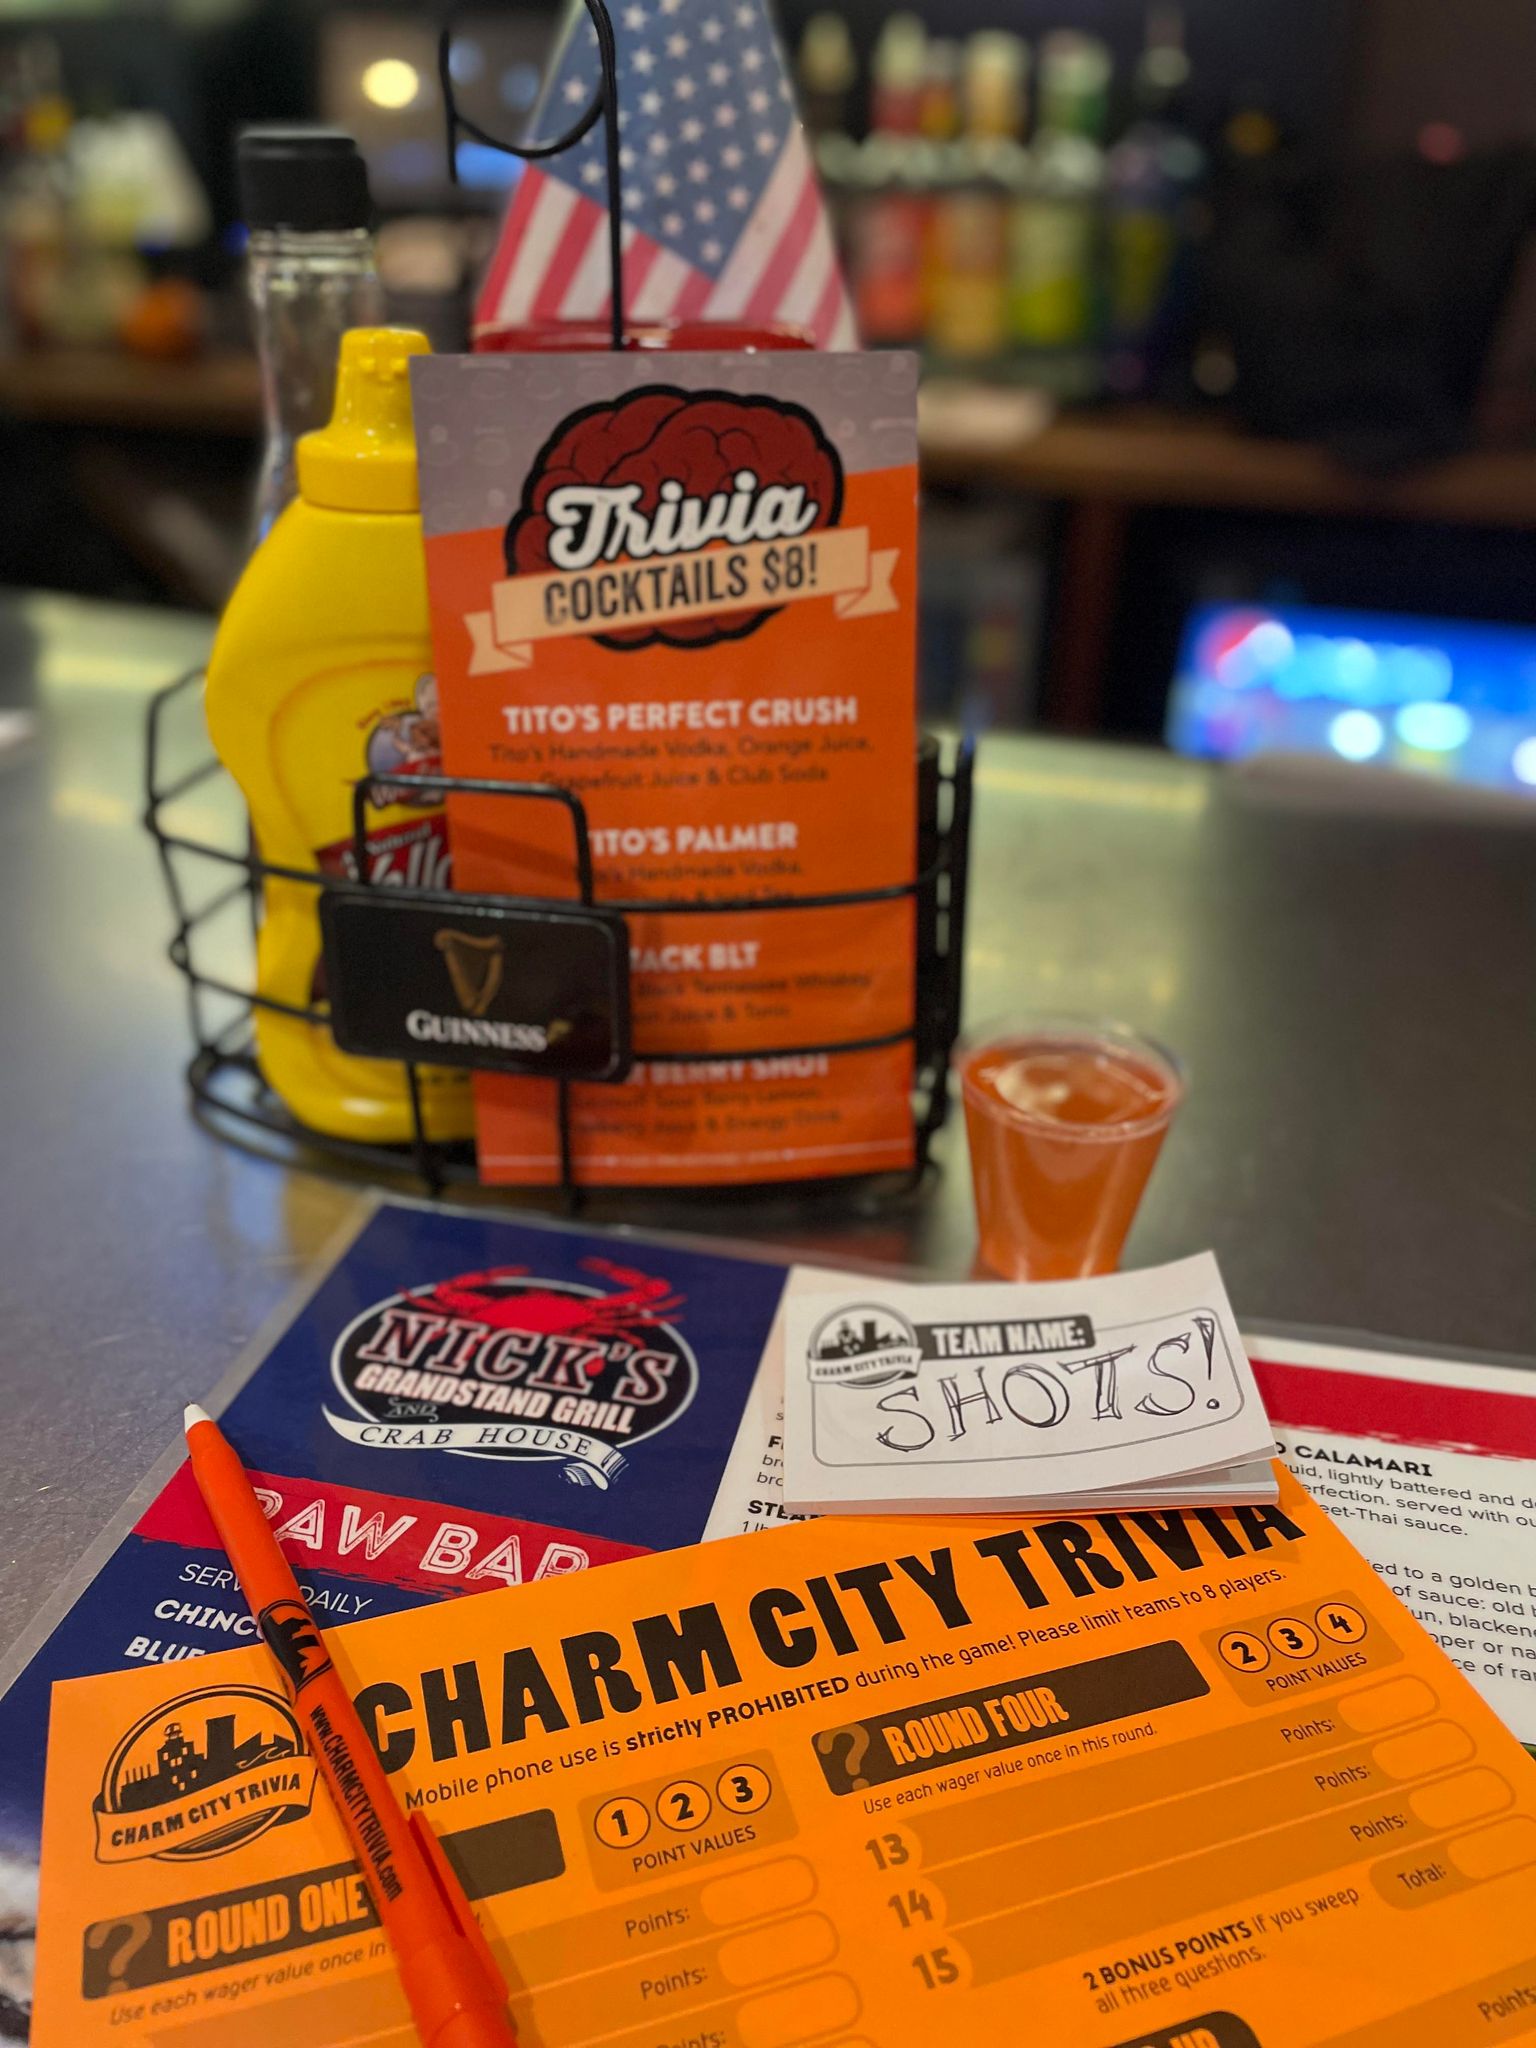 a charm city trivia player sheet and answer booklet on top of a menu, with a smaller menu that lists trivia cocktails